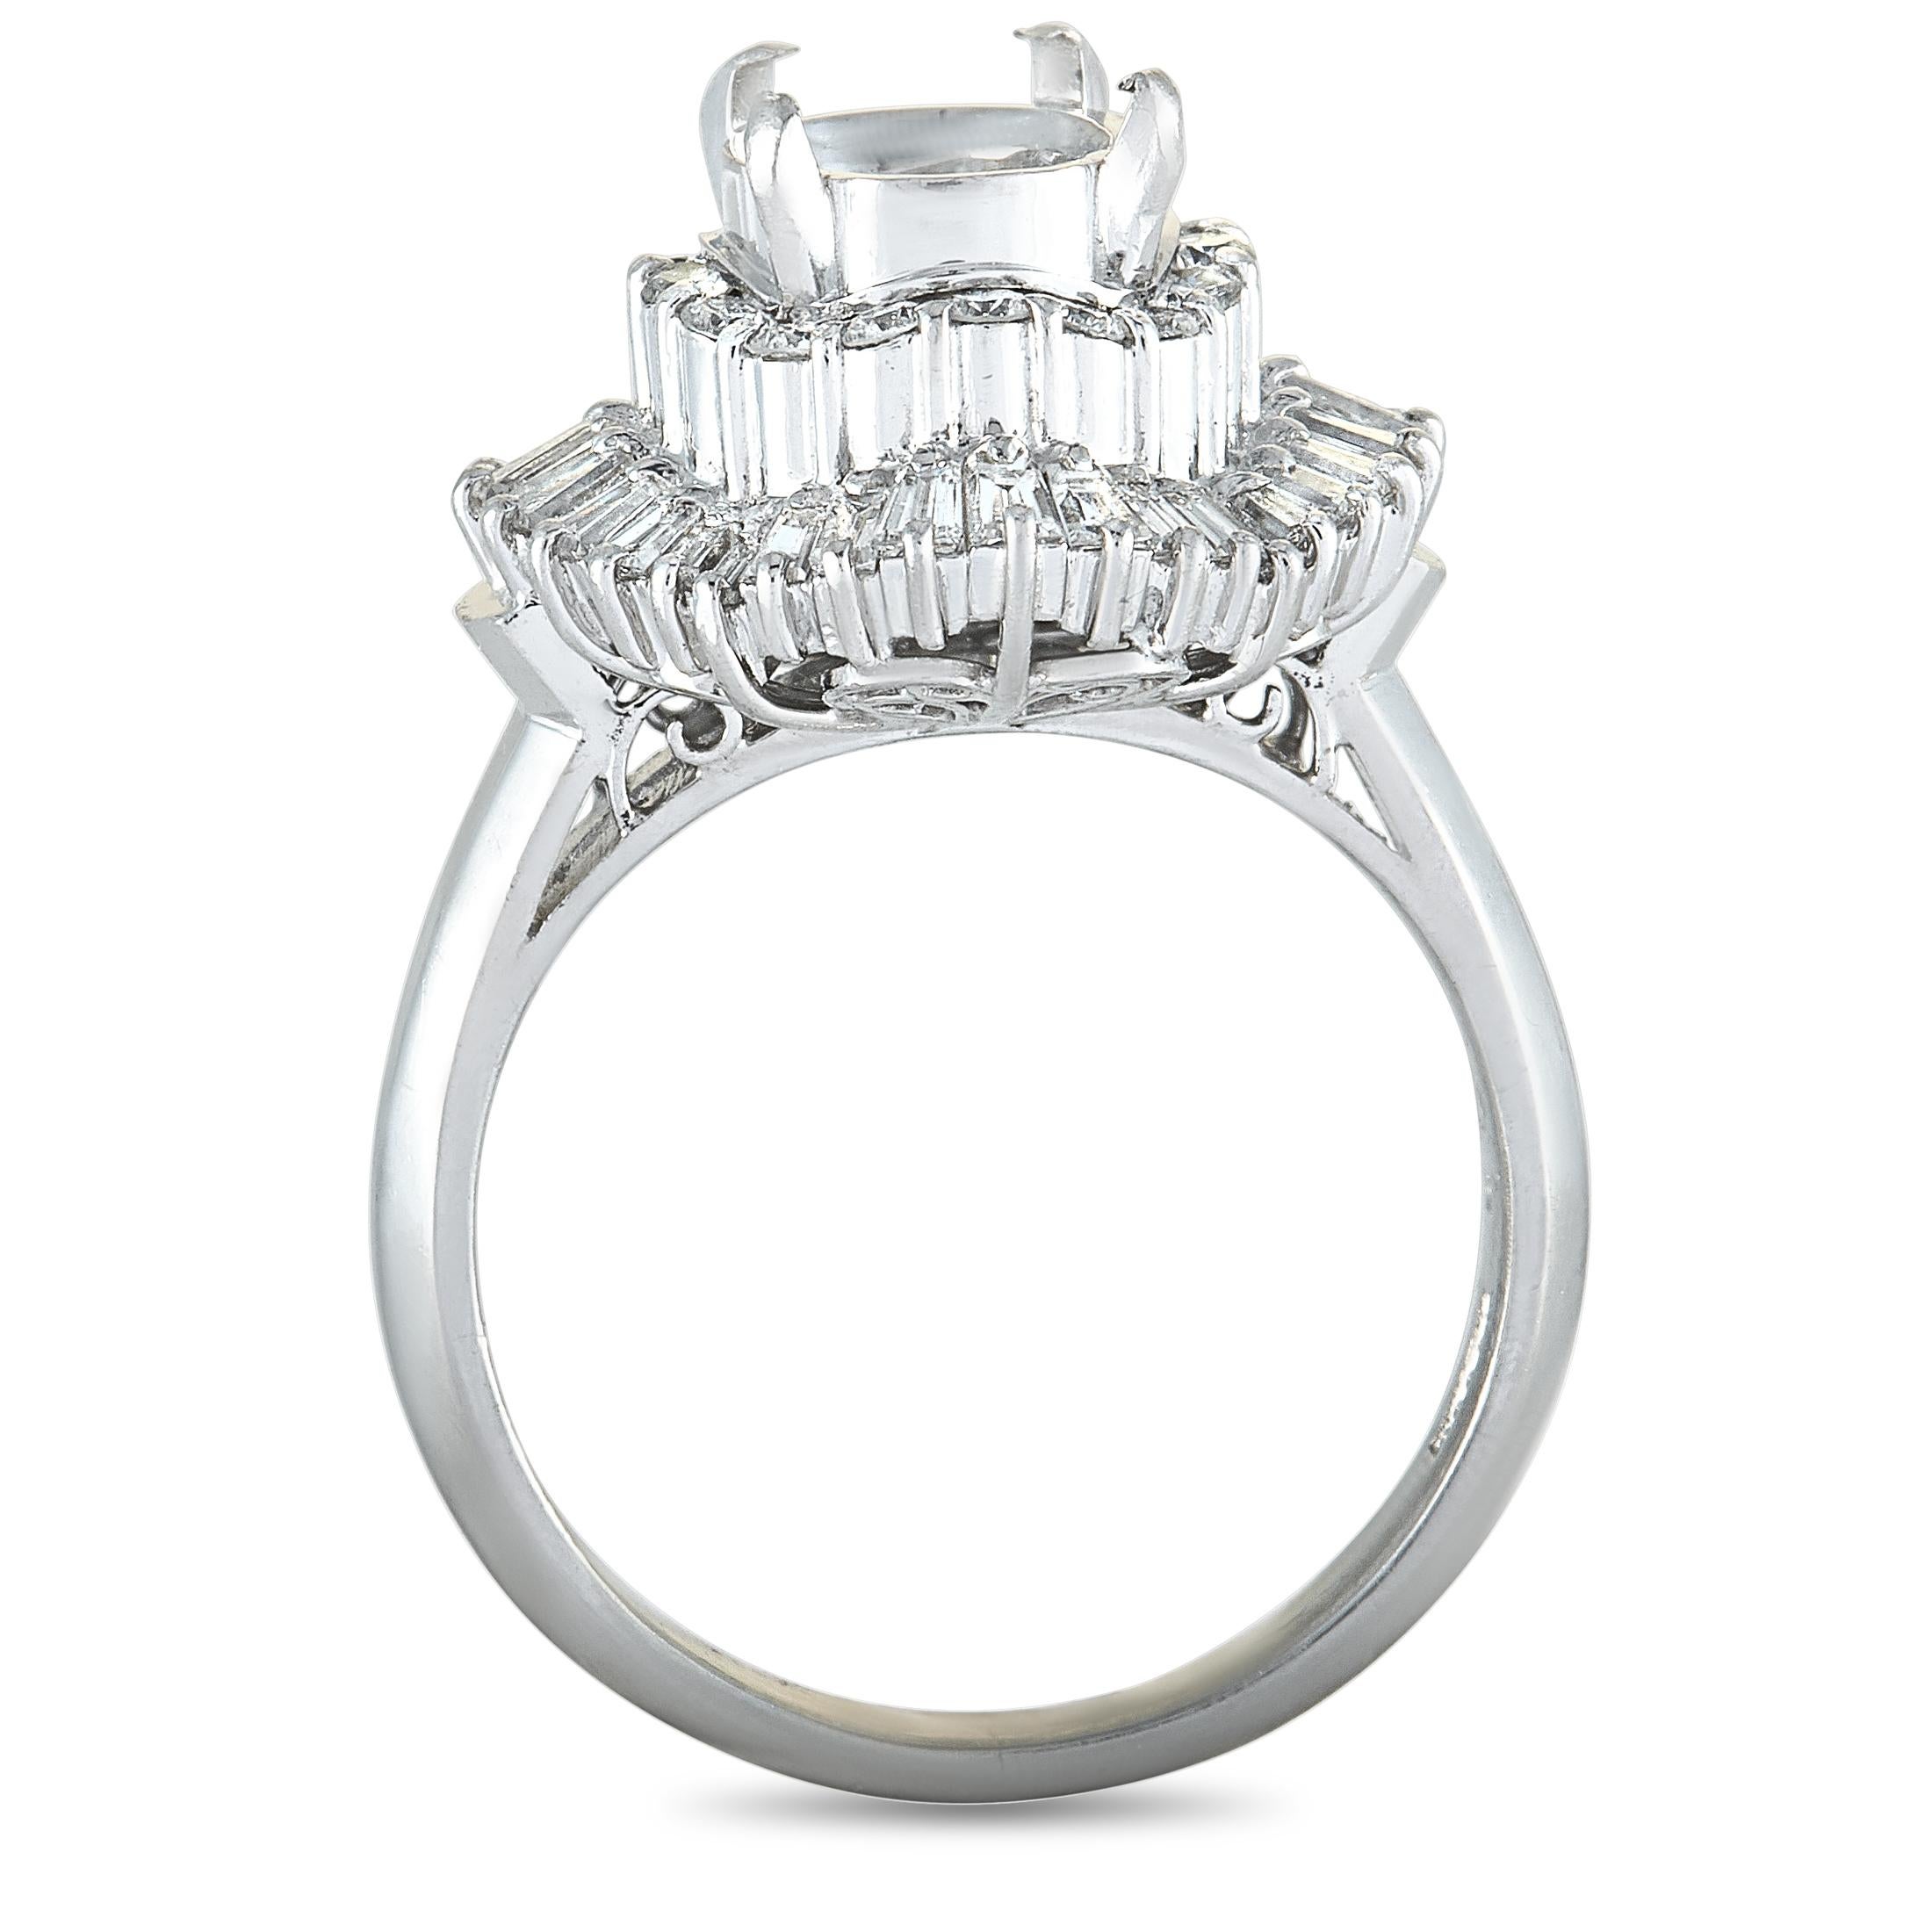 This mounting ring is crafted from platinum and weighs 9.1 grams, boasting band thickness of 2 mm and top height of 11 mm, while top dimensions measure 15 by 16 mm. The ring is embellished with round and tapered baguette diamond stones that weigh